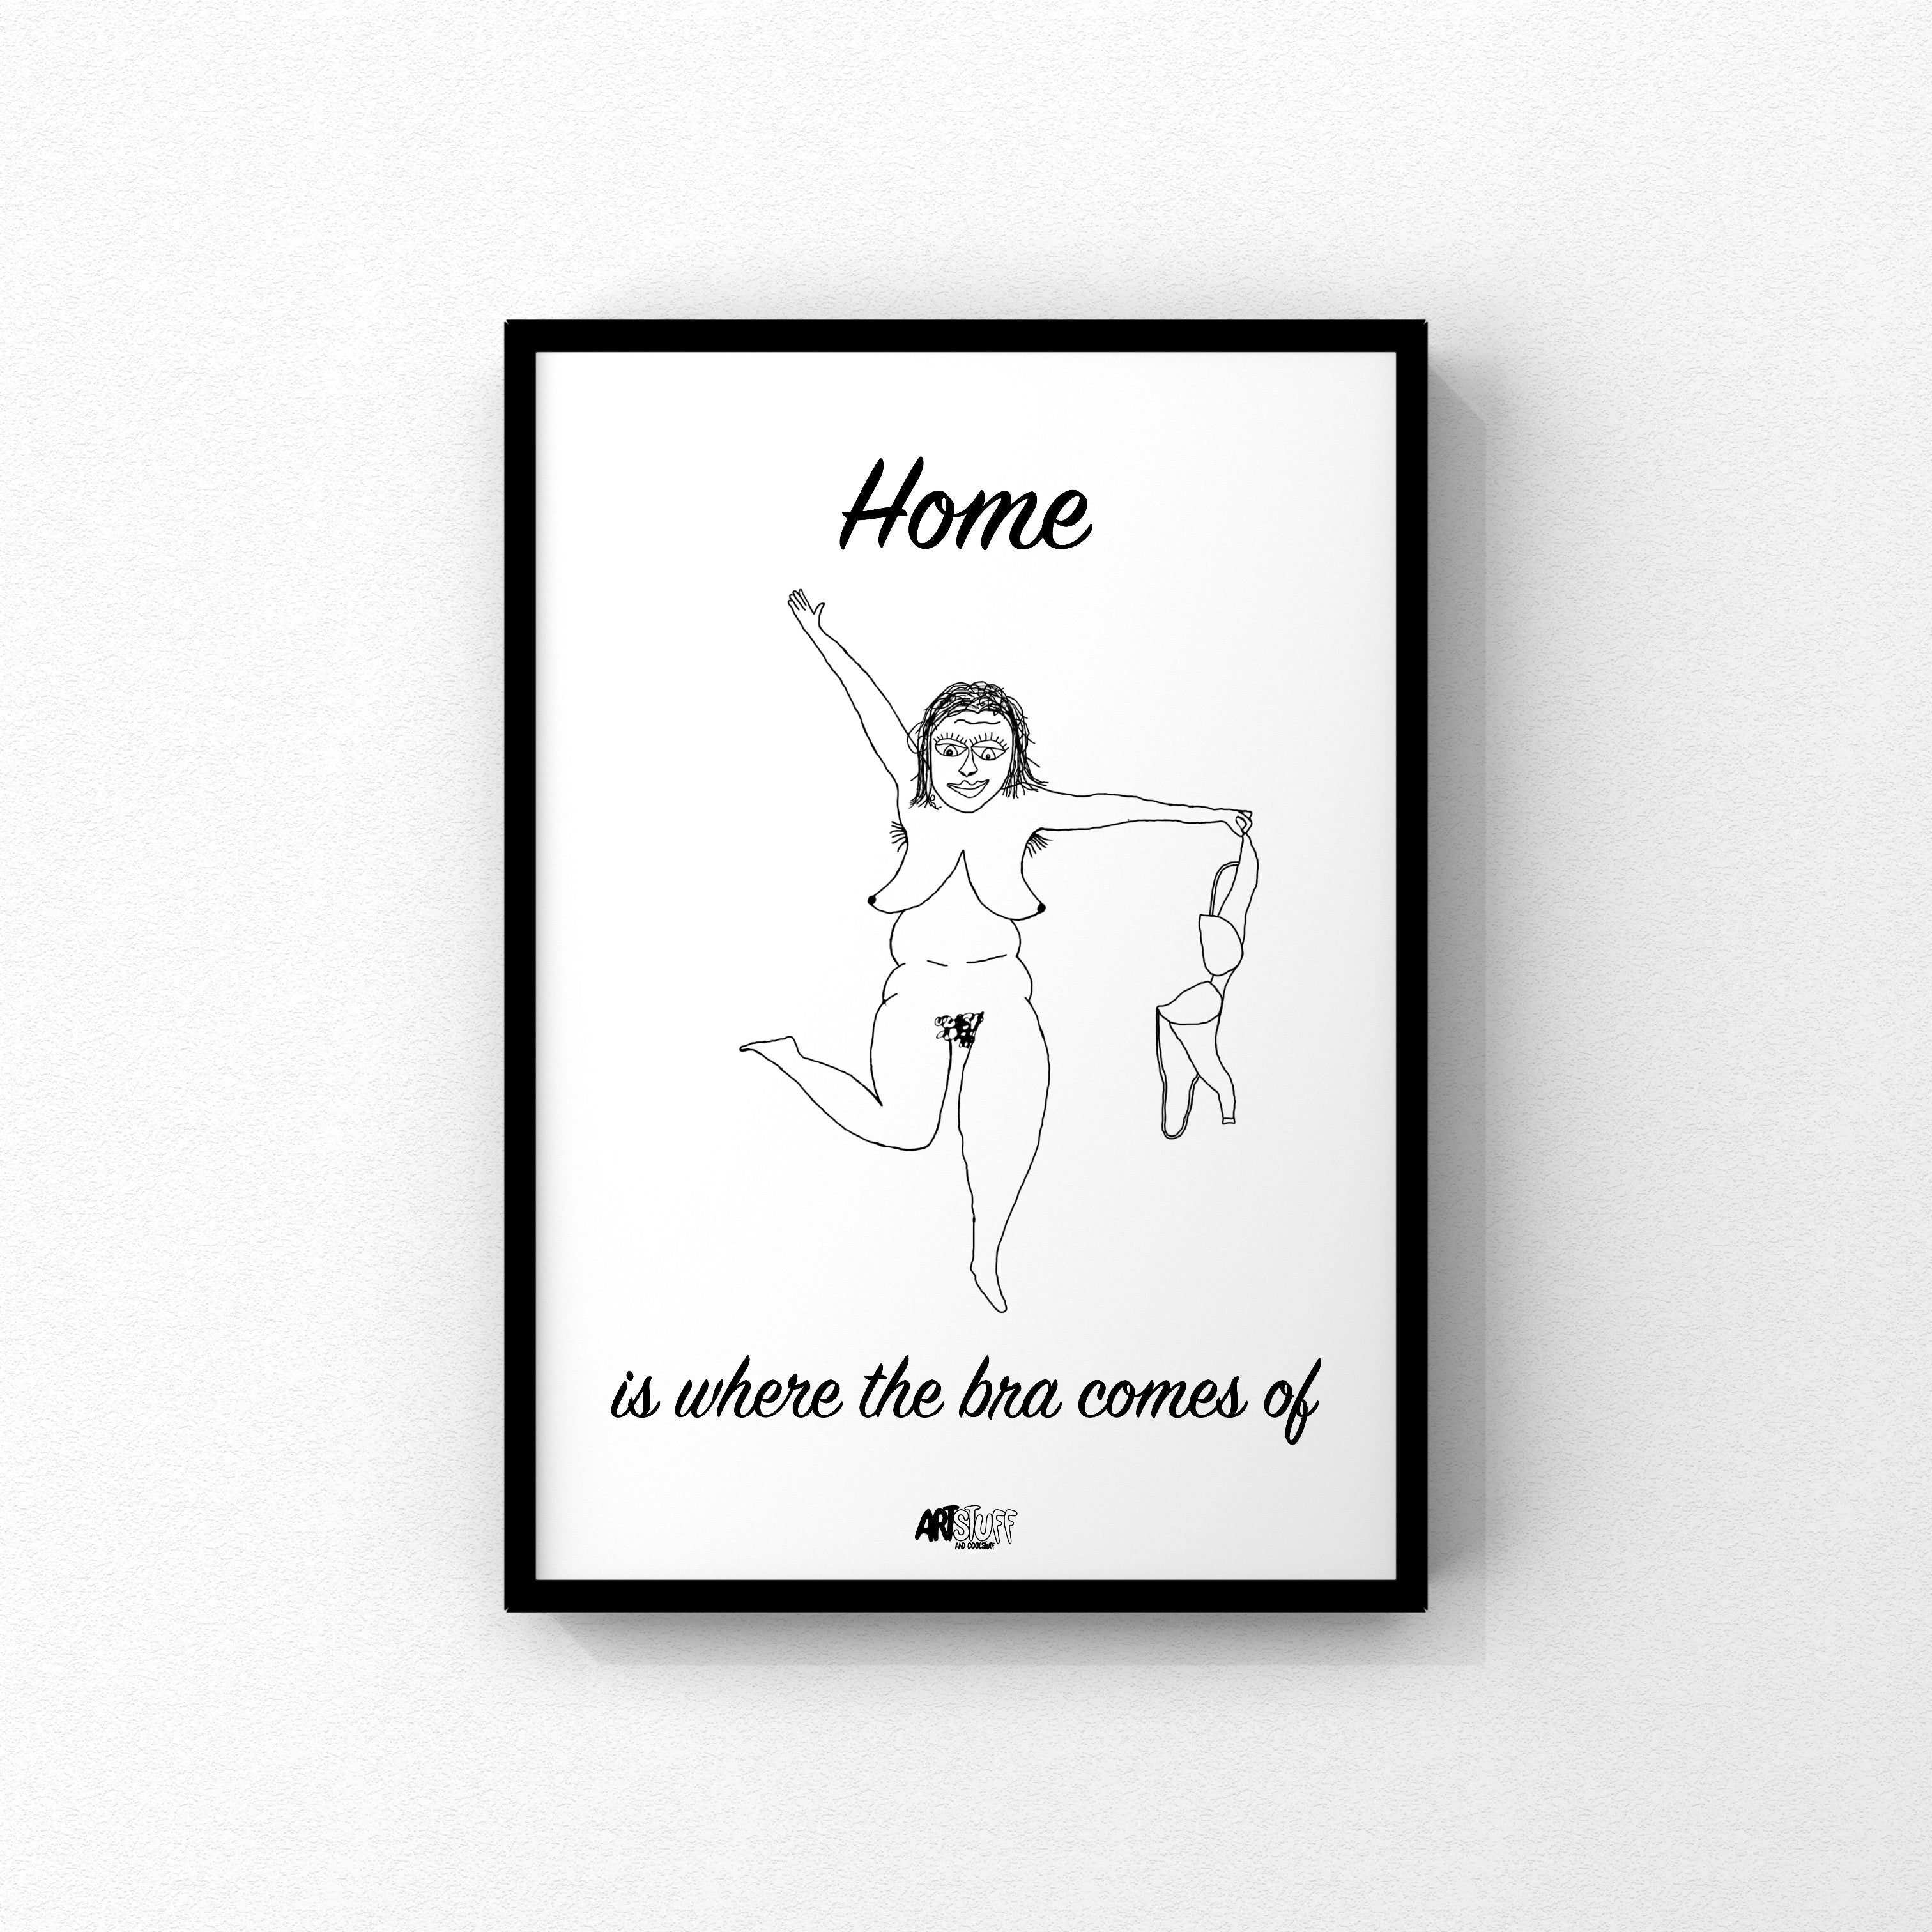 Kunstprint A3 - Home is where the bra comes of Artstuff and coolstuff